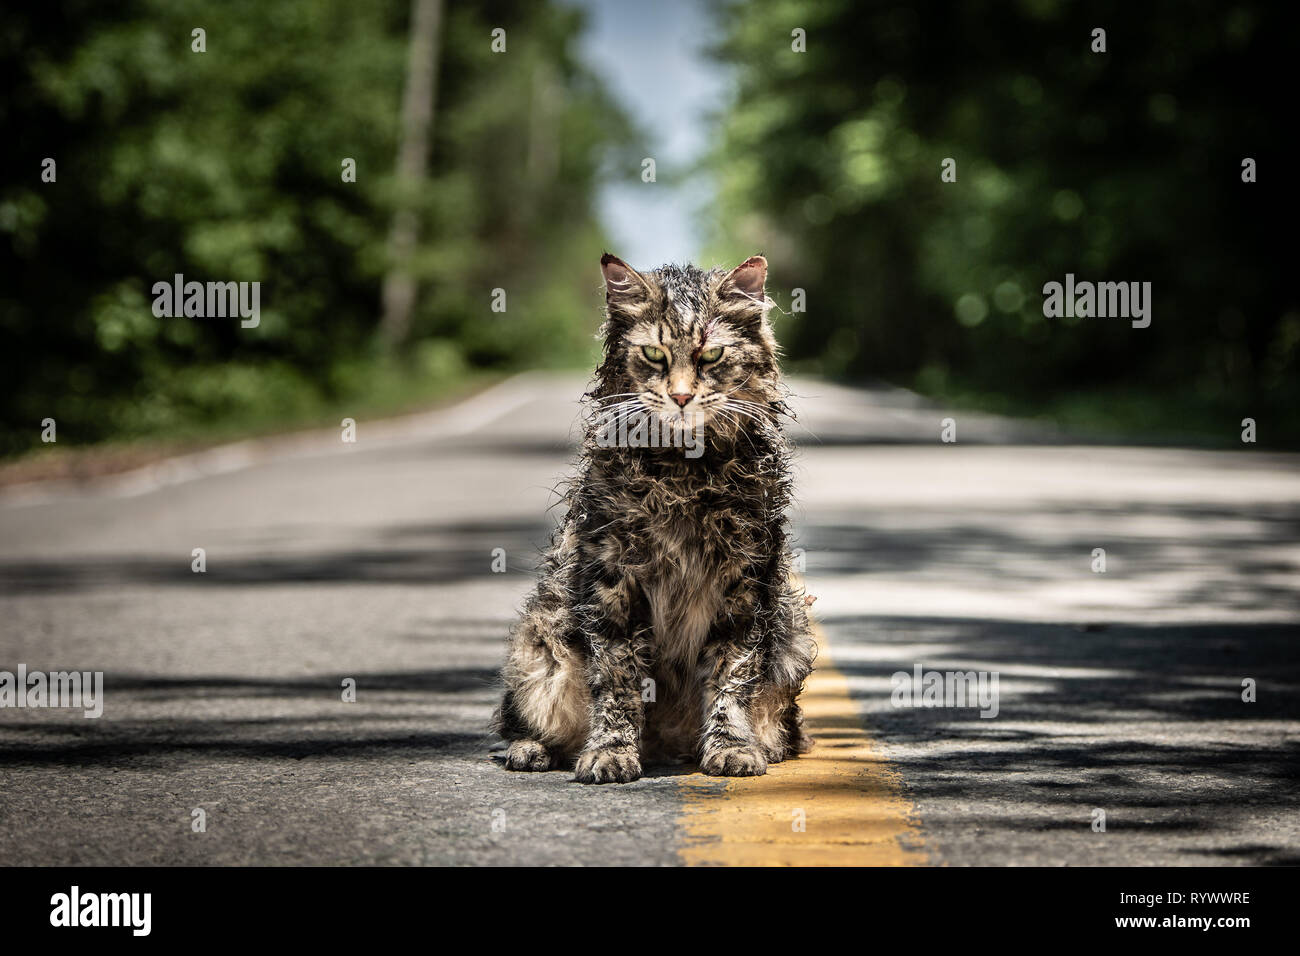 RELEASE DATE: April 5, 2019 TITLE: Pet Sematary STUDIO: Paramount Pictures DIRECTOR: Kevin Kolsch, Dennis Widmyer PLOT: Louis Creed, his wife Rachel, and their two children Gage and Ellie move to a rural home where they are welcomed and enlightened about the eerie 'Pet Sematary' located nearby. After the tragedy of their cat being killed by a truck, Louis resorts to burying it in the mysterious pet cemetery, which is definitely not as it seems, as it proves to the Creeds that sometimes, dead is better. STARRING: Zombie cat. (Credit Image: © Paramount Pictures/Entertainment Pictures) Stock Photo